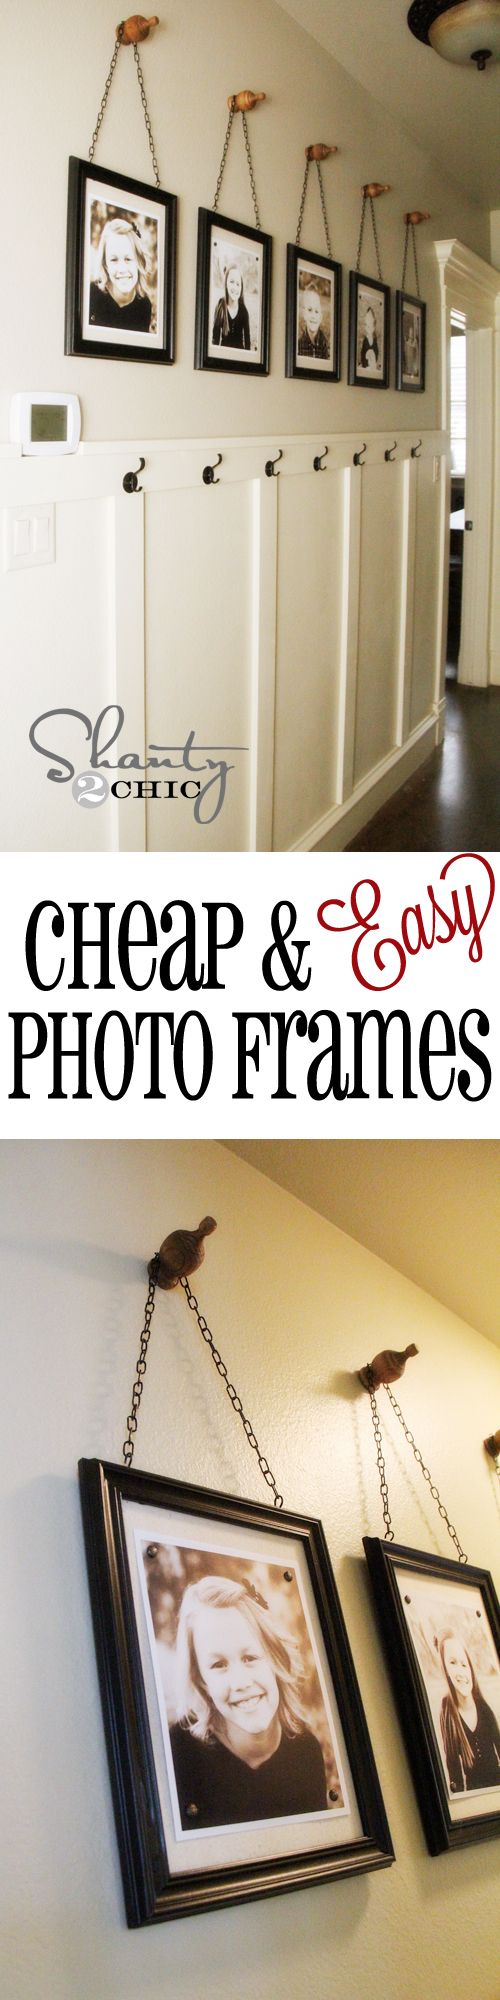 5 Creative Ideas for Hanging Pictures